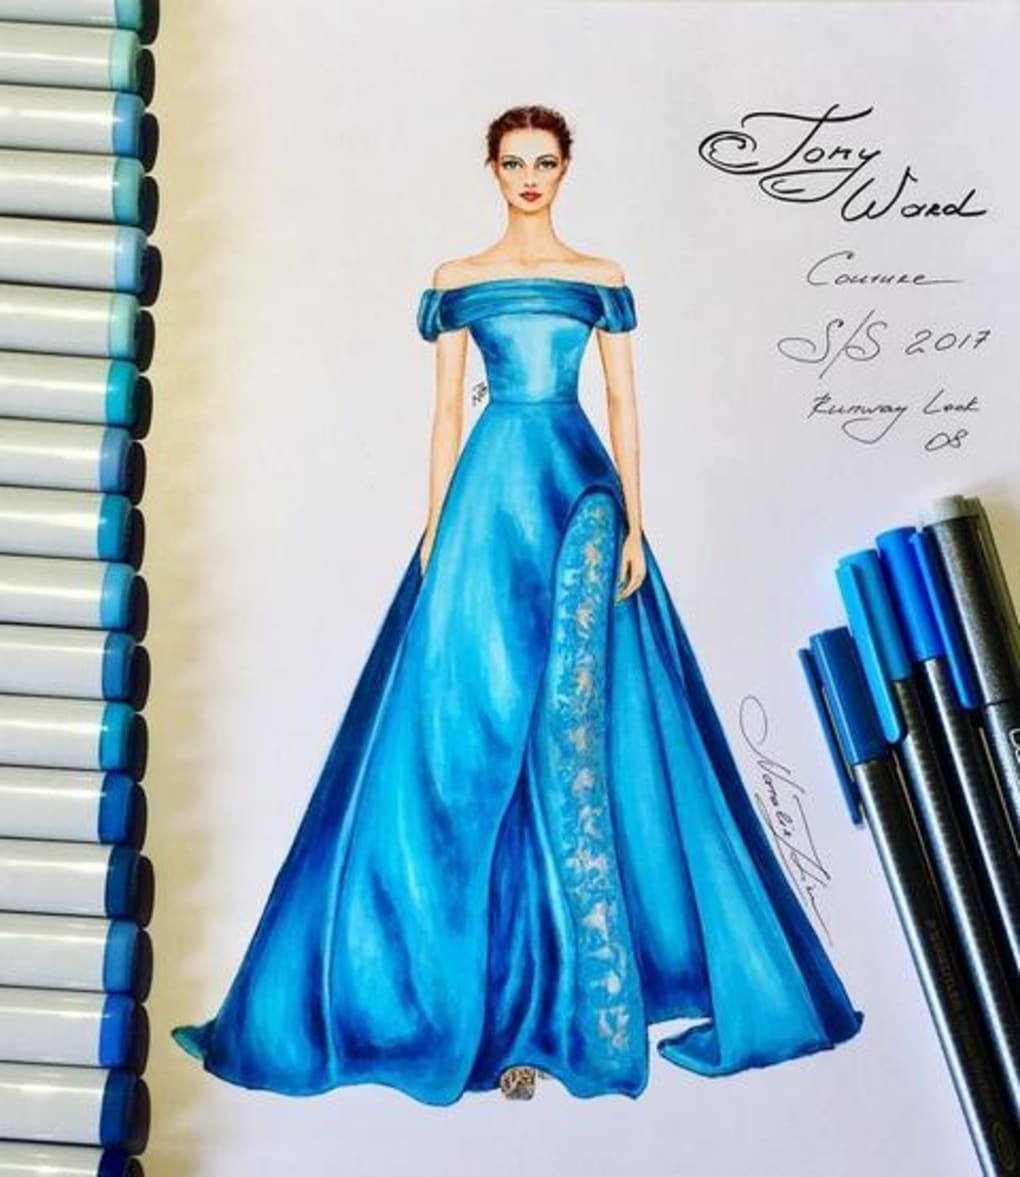 Fashion Designs Drawings Types Techniques And Examples